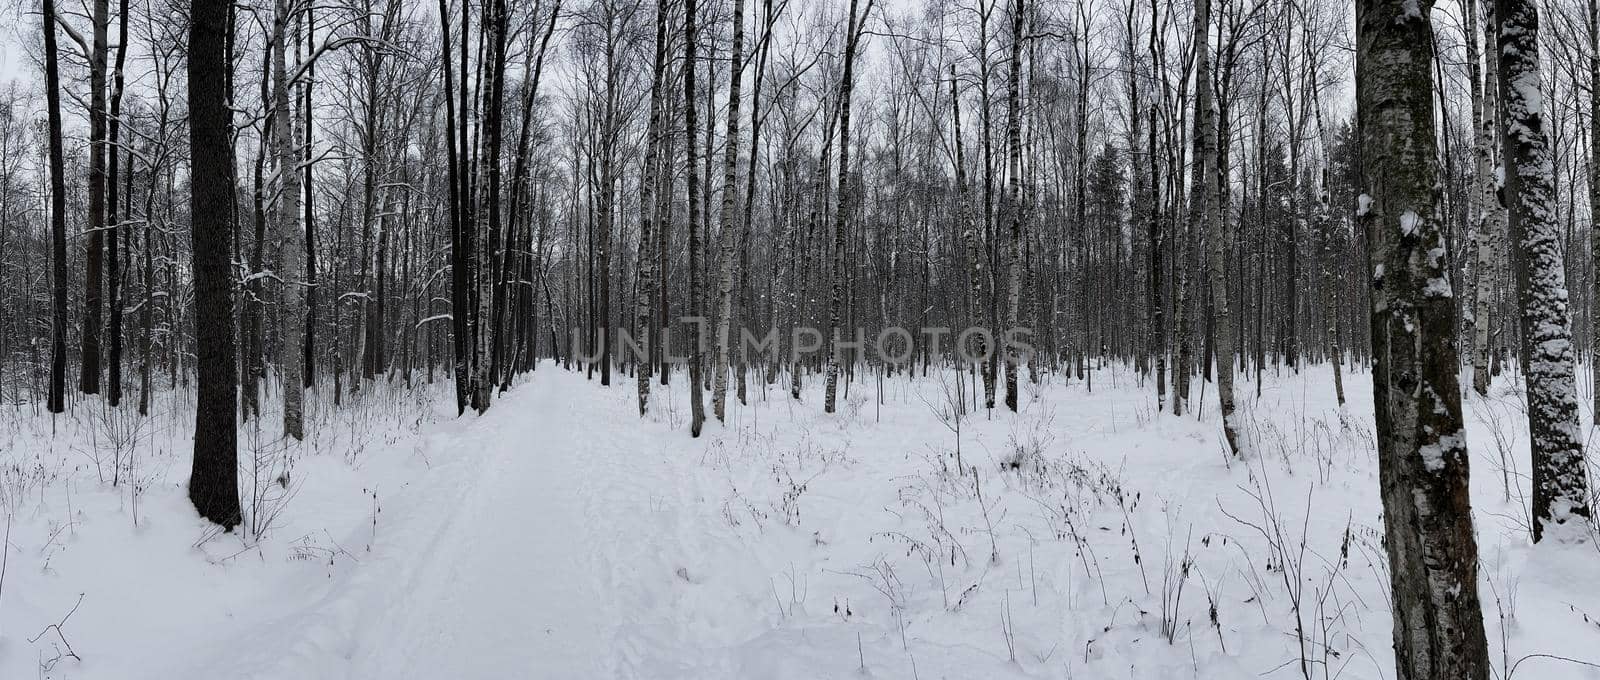 Panoramic image of snow-covered empty forest, black and white birch trunks and other trees, no one in the park, peace and tranquility. High quality photo